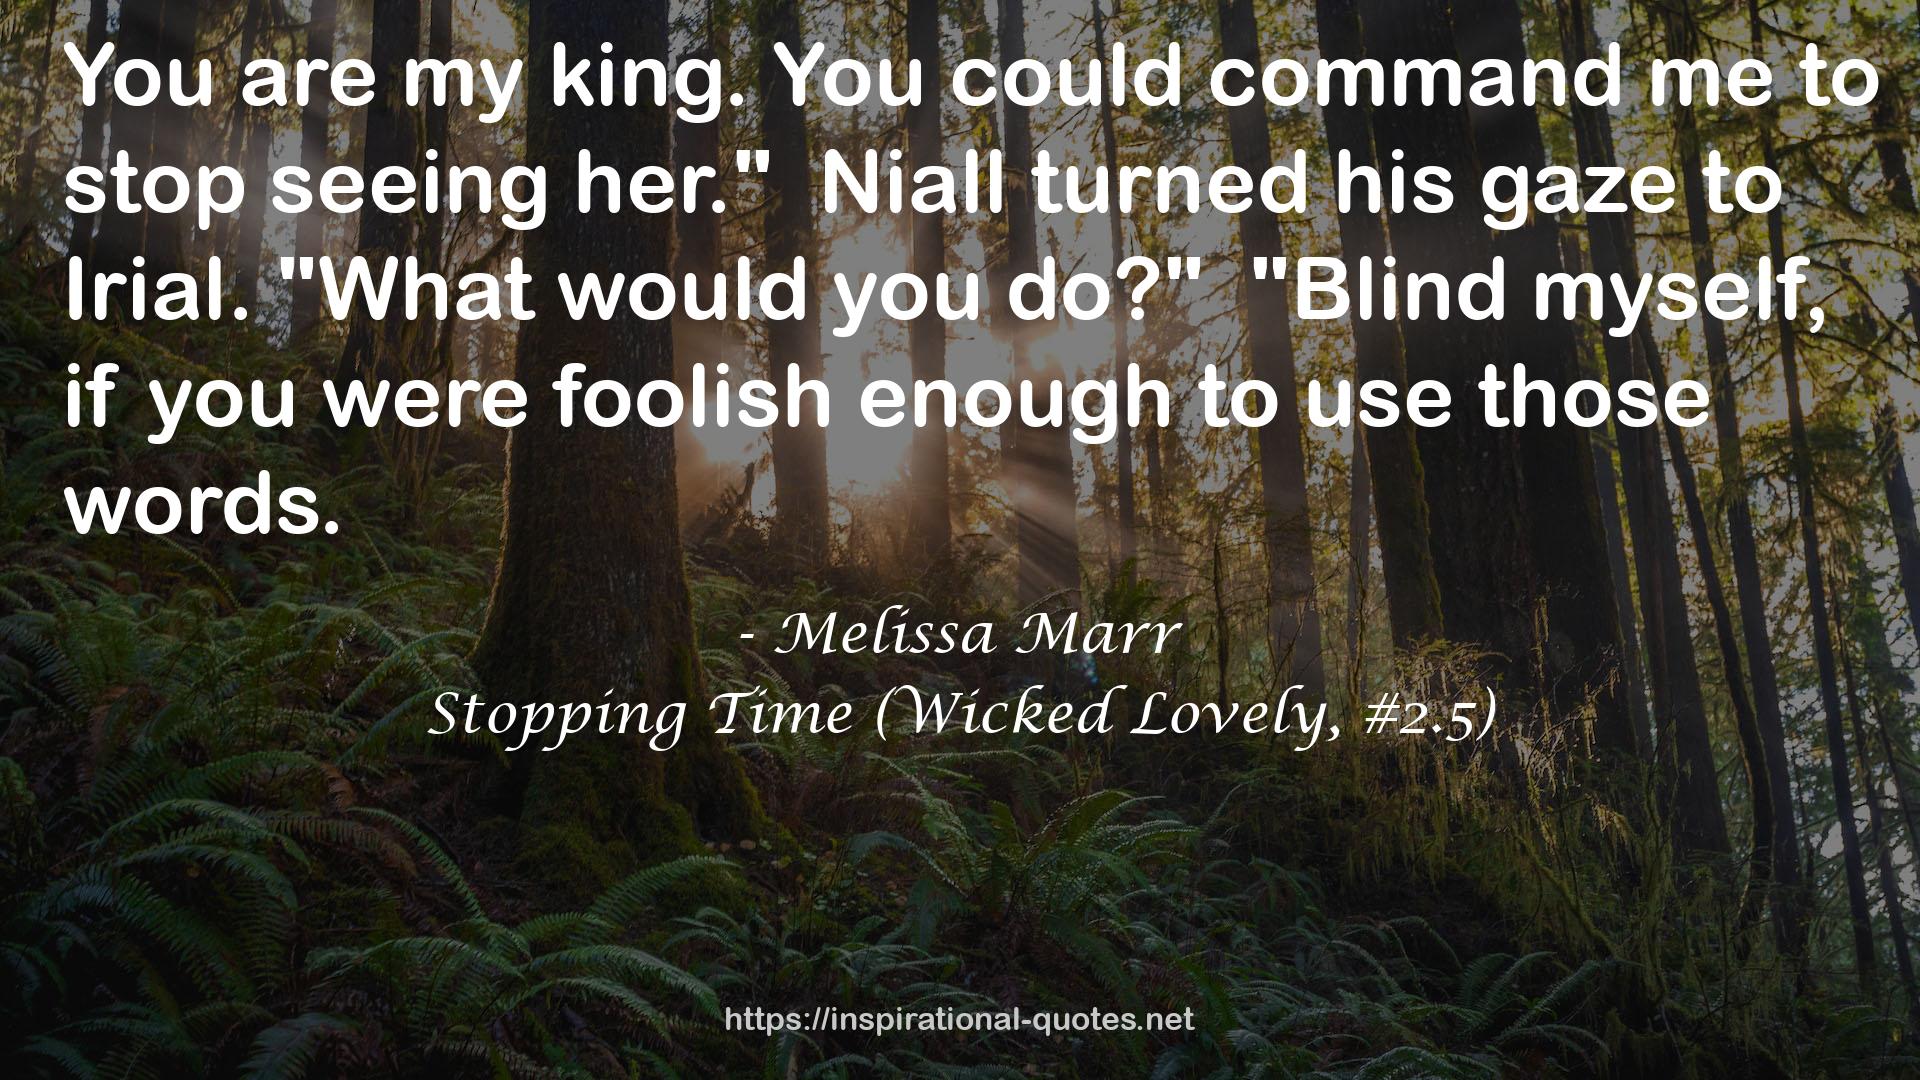 Stopping Time (Wicked Lovely, #2.5) QUOTES